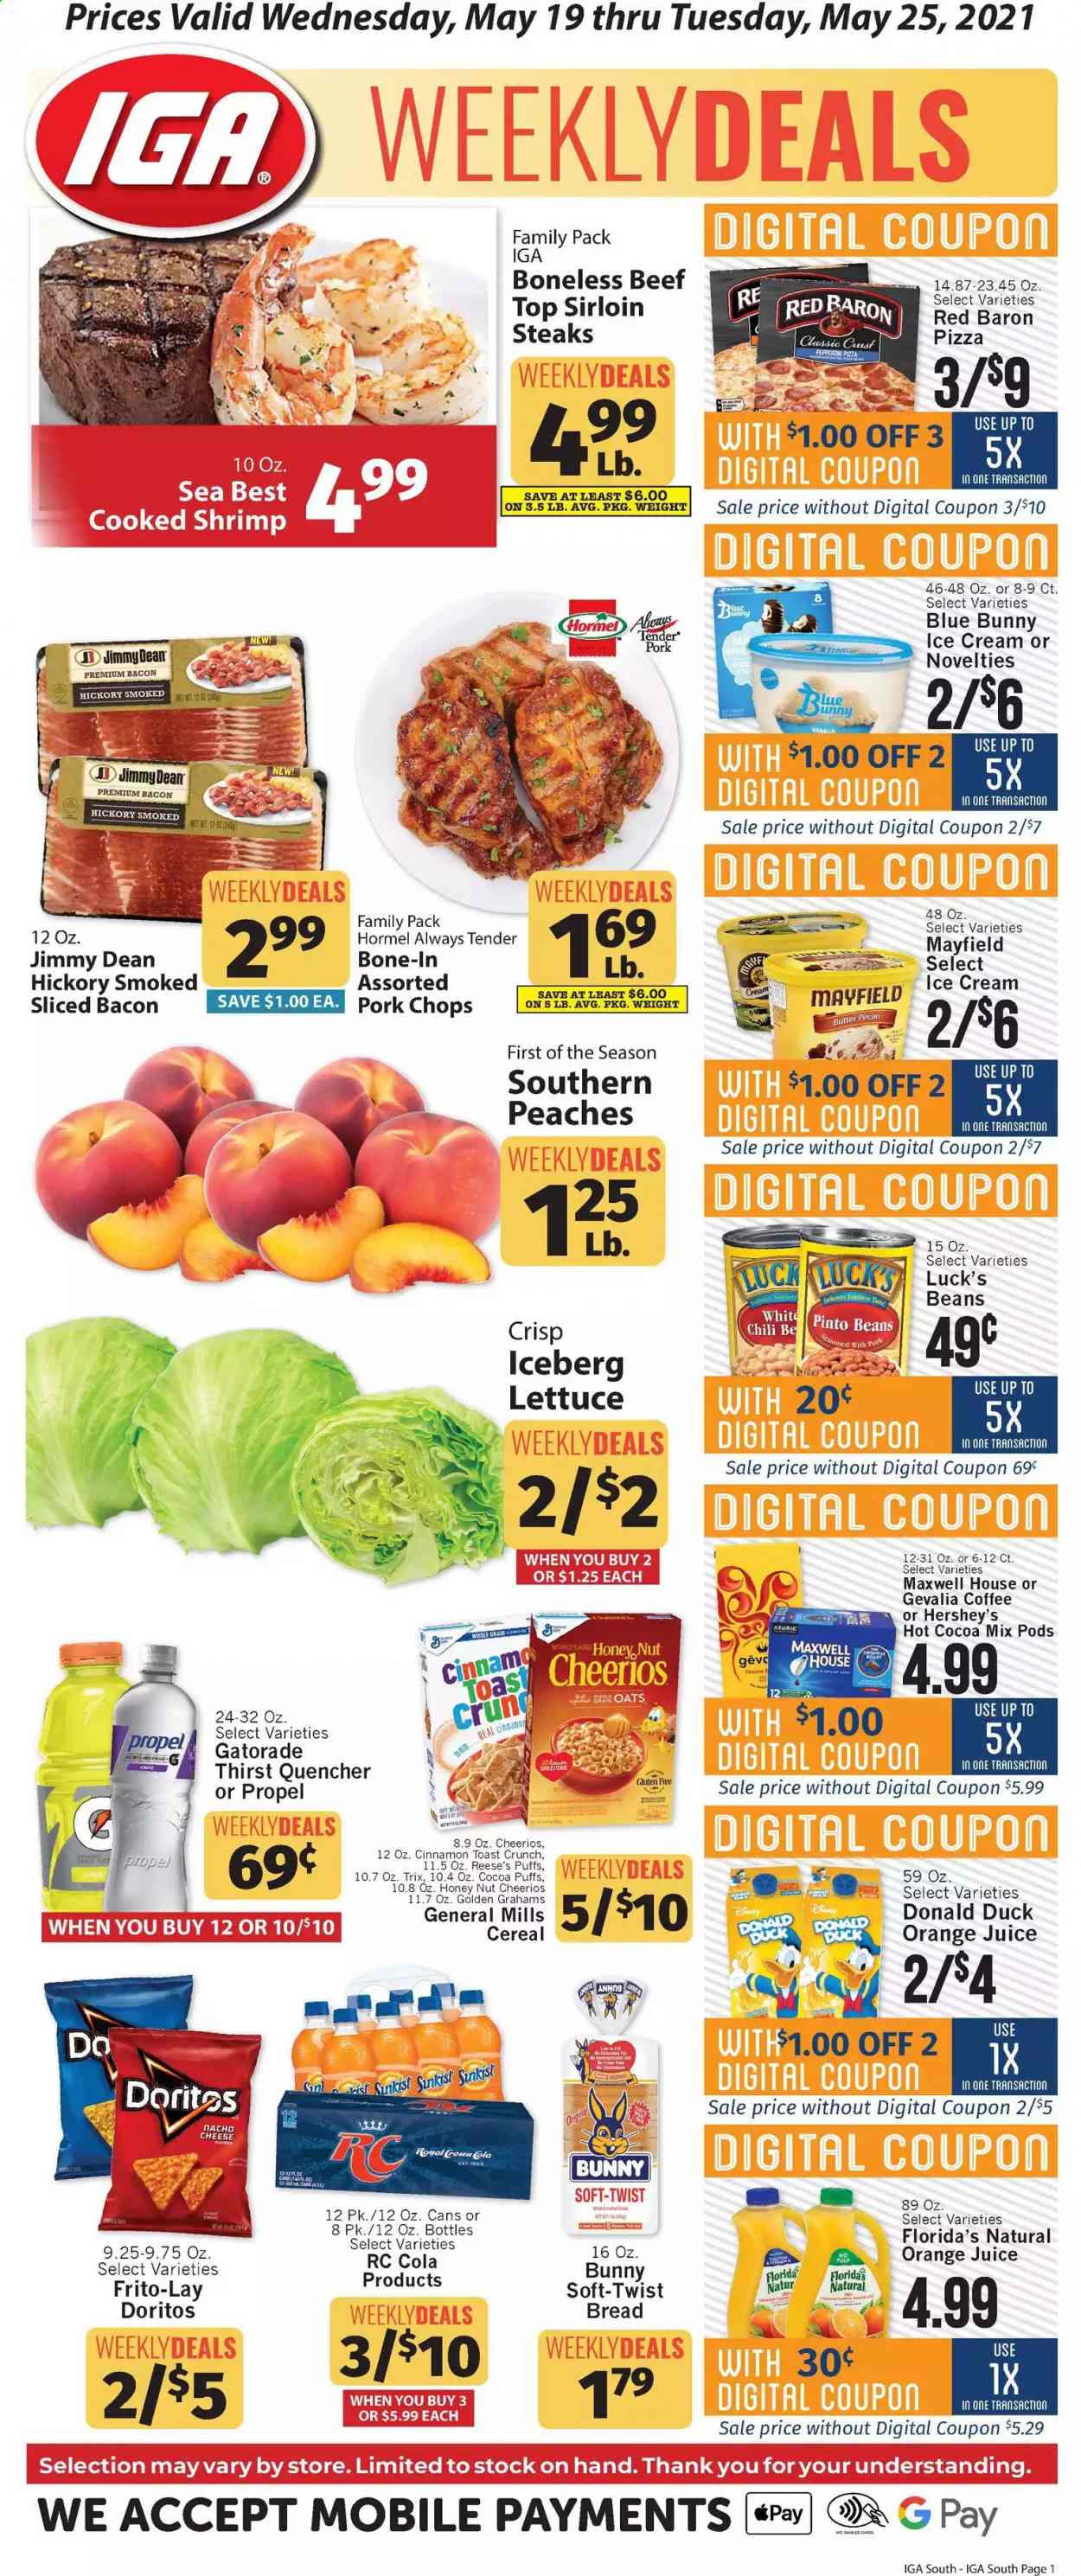 thumbnail - IGA Flyer - 05/19/2021 - 05/25/2021 - Sales products - bread, puffs, lettuce, shrimps, pizza, Jimmy Dean, Hormel, bacon, pepperoni, butter, ice cream, Hershey's, Ola, Blue Bunny, Red Baron, Florida's Natural, Doritos, Frito-Lay, oats, pinto beans, cereals, Cheerios, Trix, cinnamon, orange juice, juice, Gatorade, hot cocoa, Maxwell House, coffee, Gevalia, Keurig, steak, sirloin steak, pork chops, pork meat, peaches. Page 1.